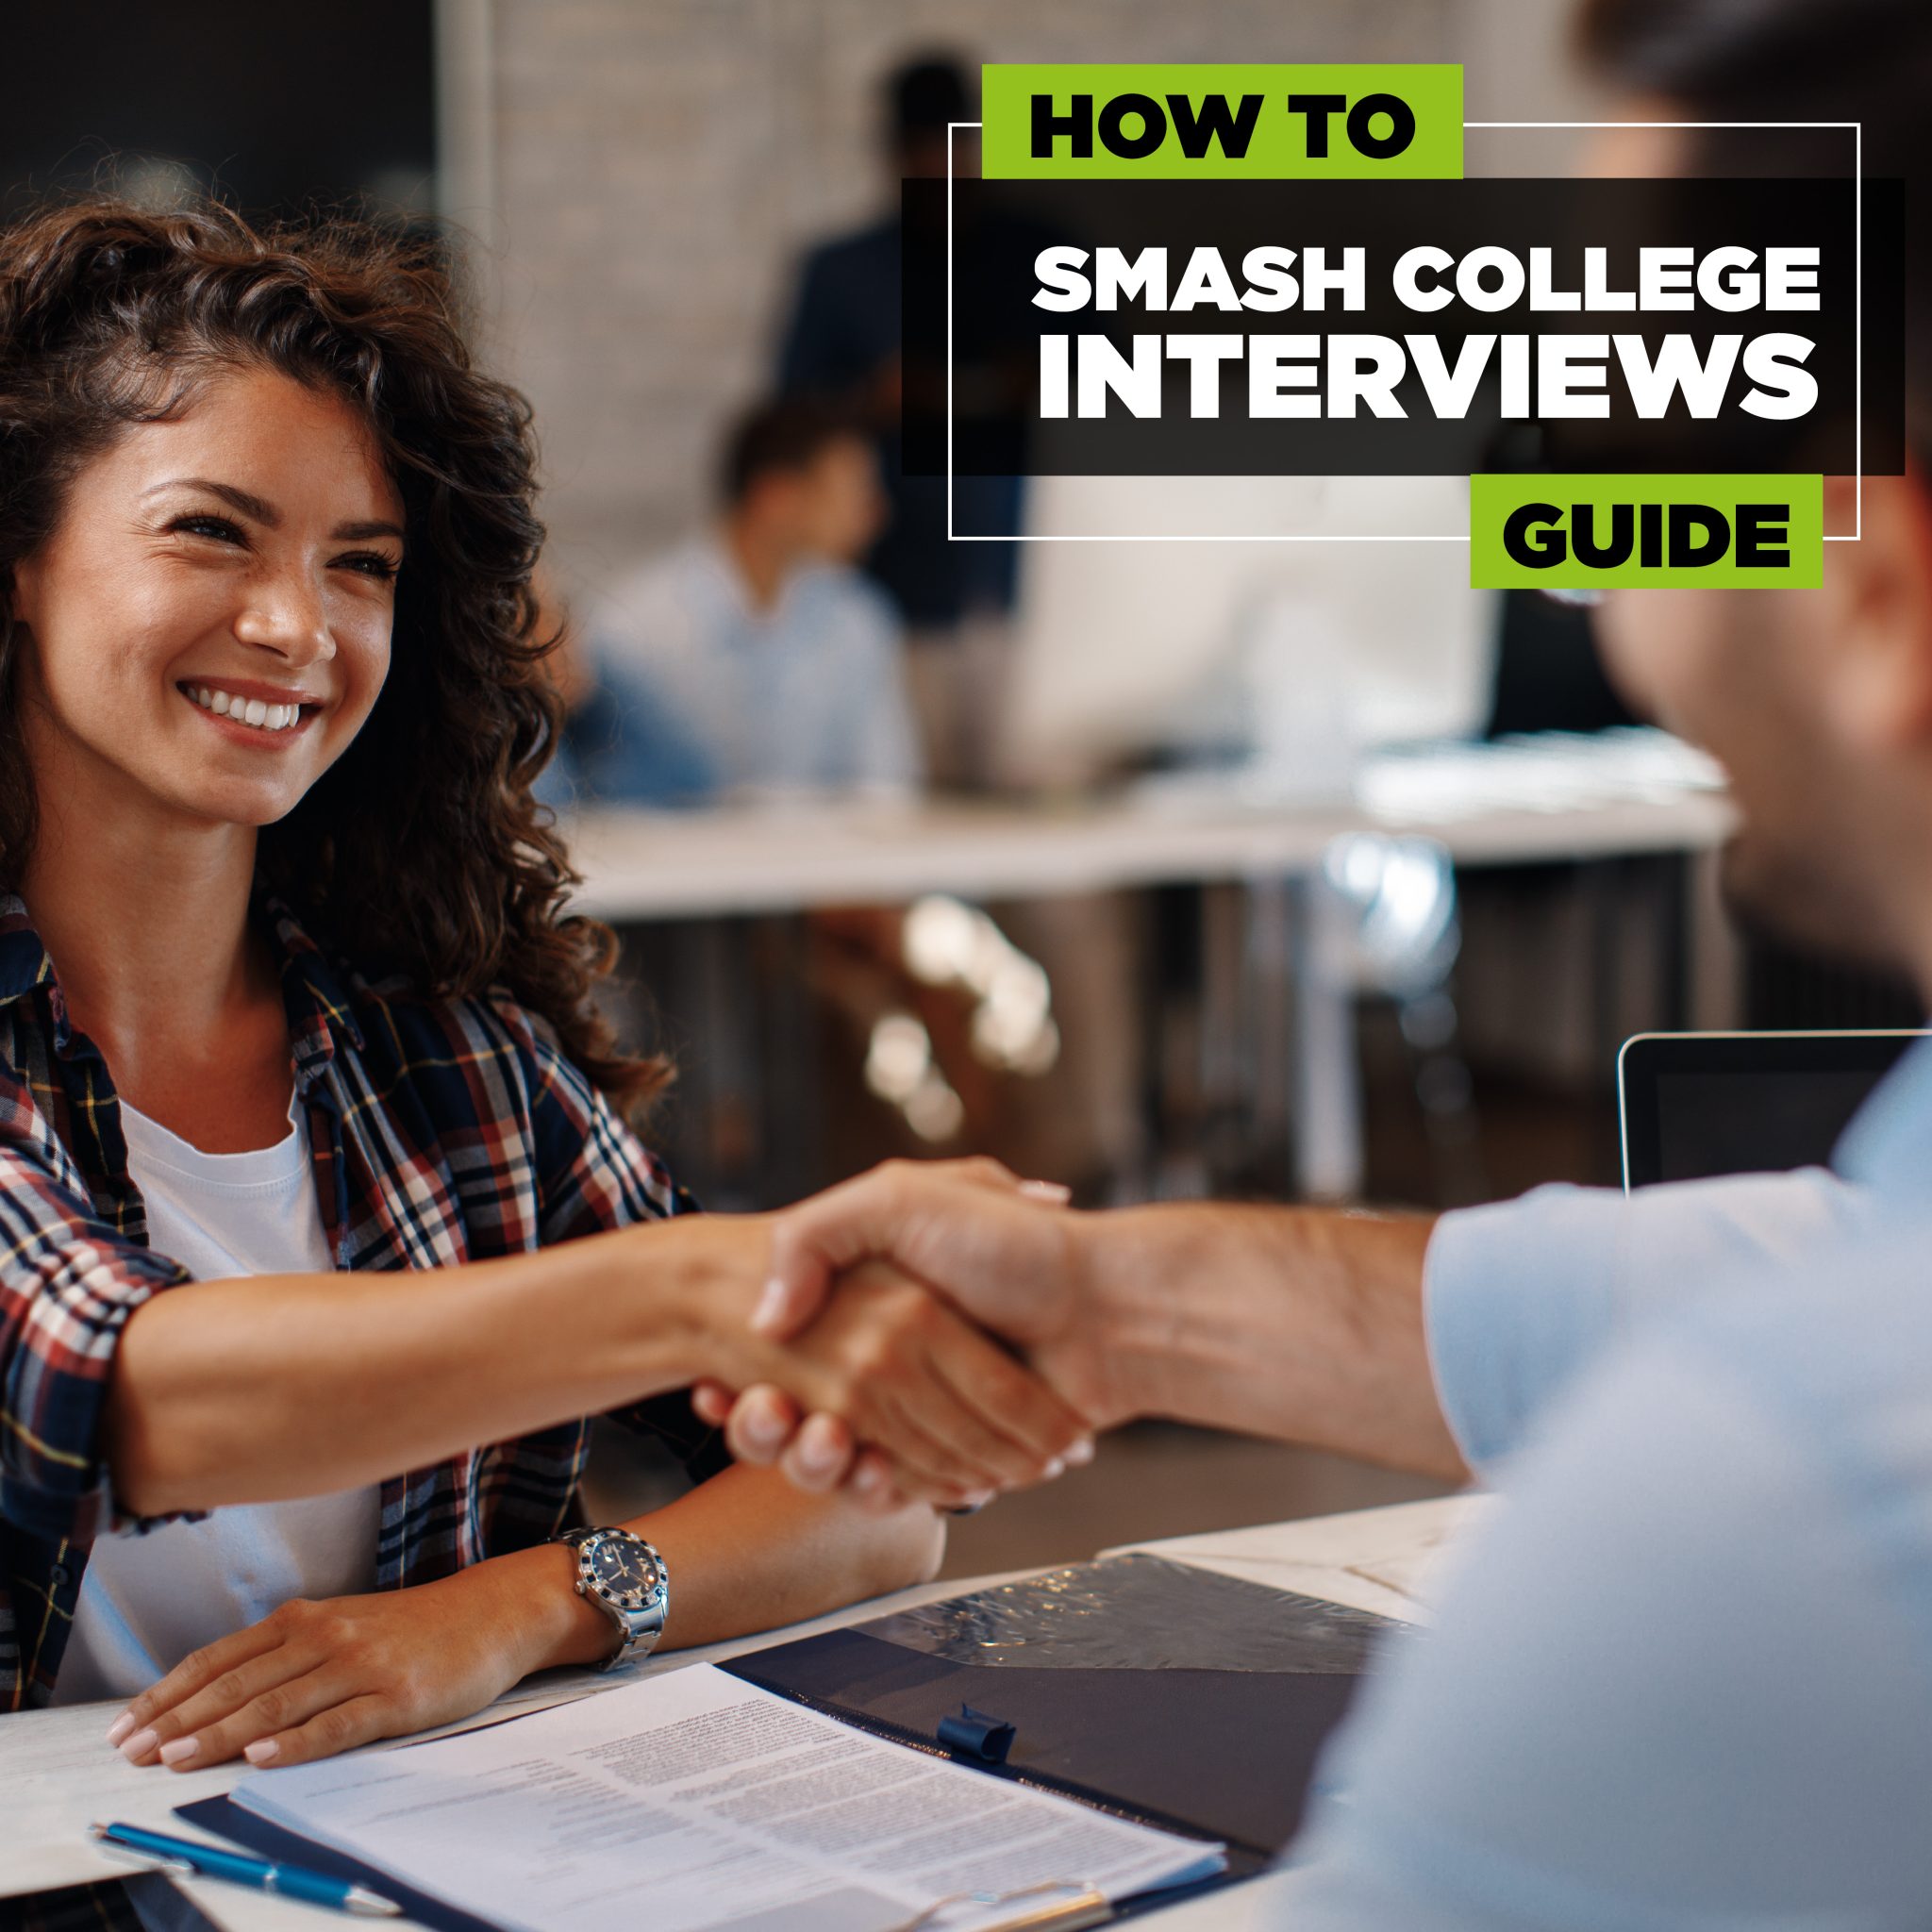 How to smash college interviews guide